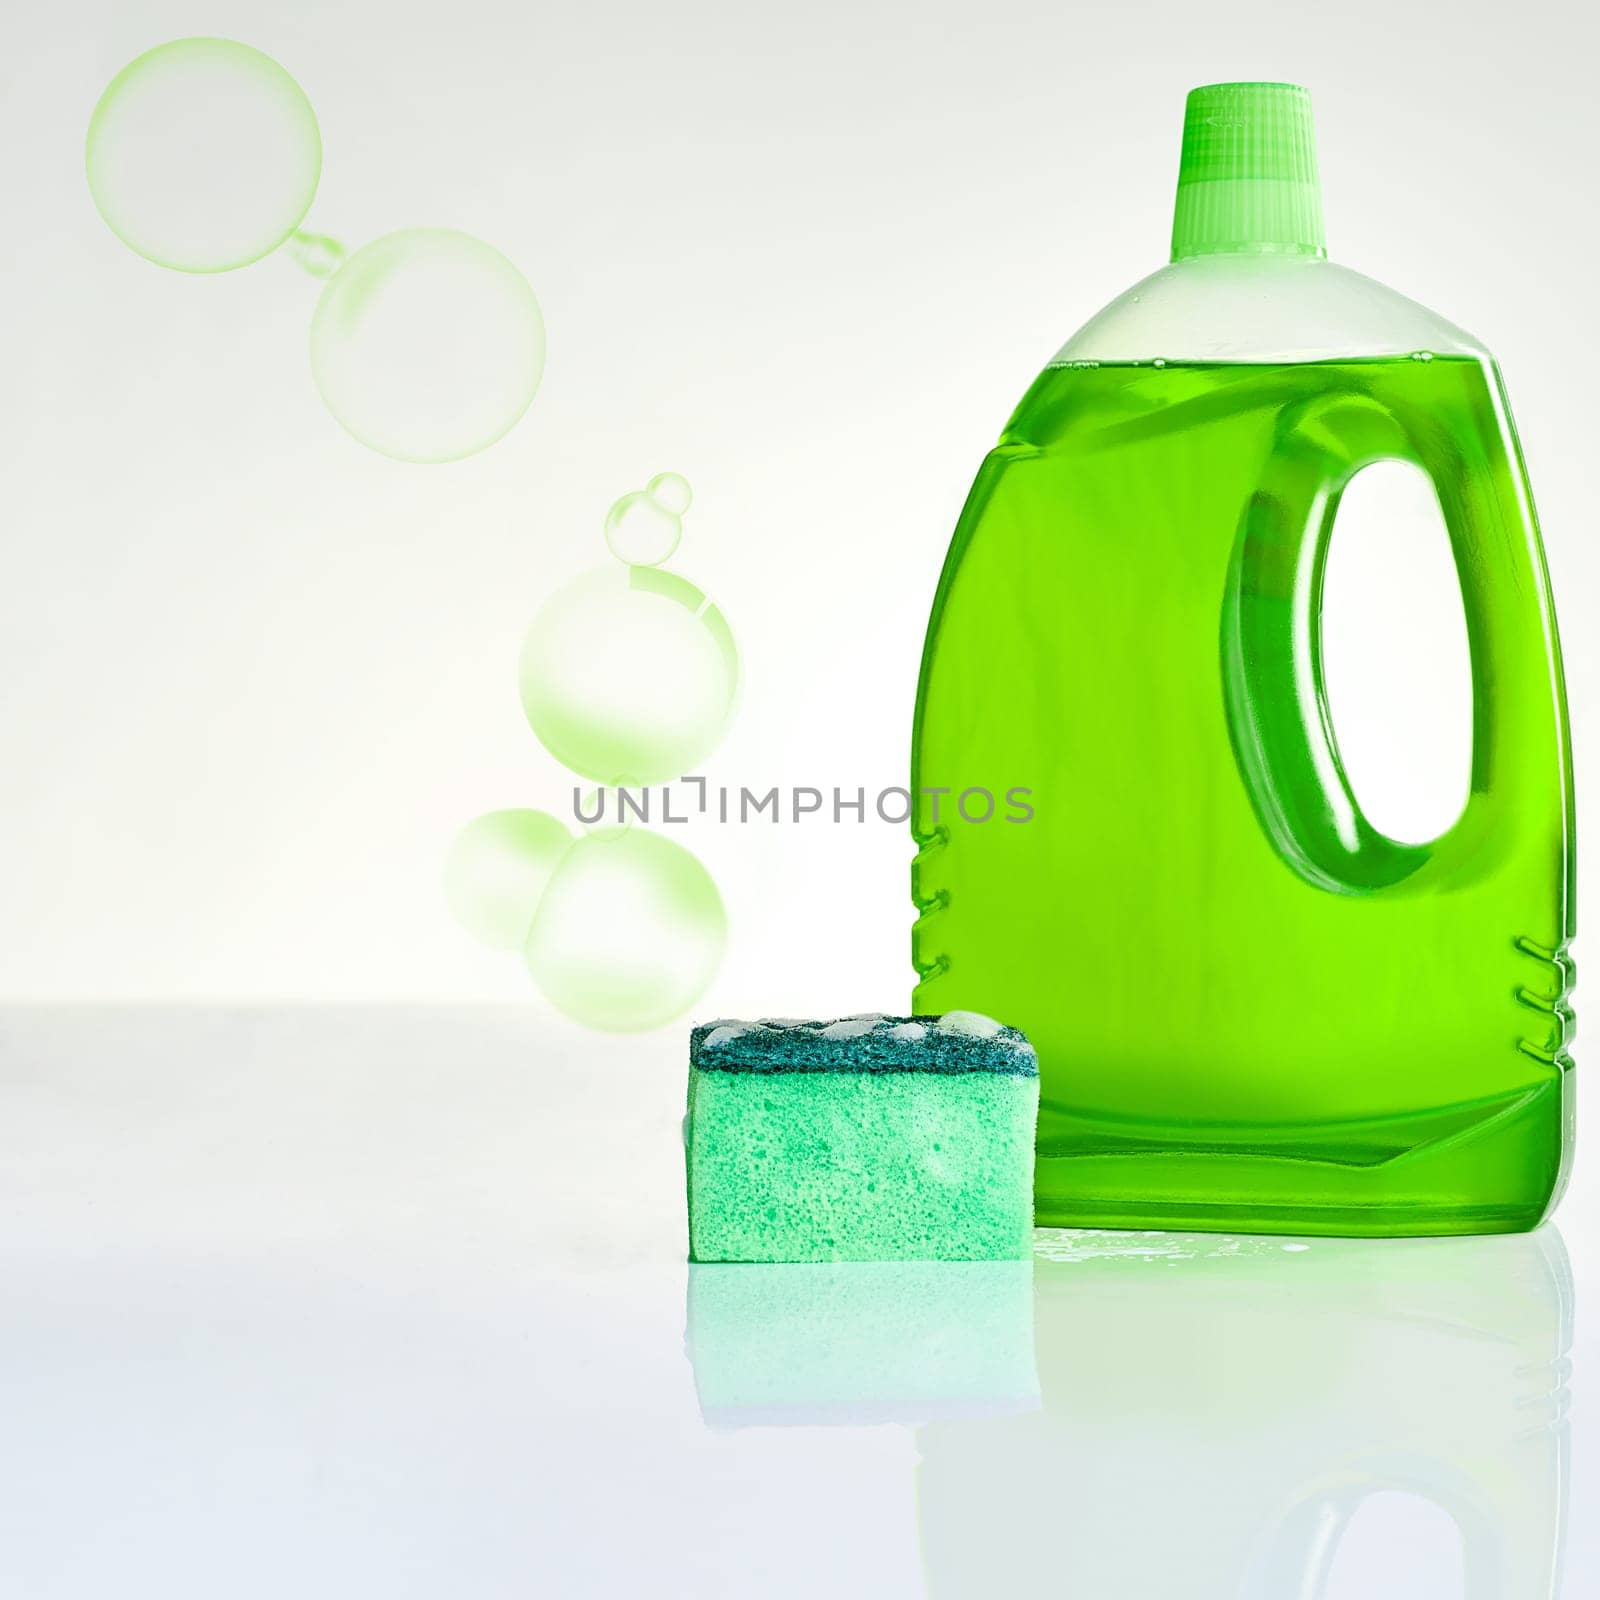 Bubble, soap and bottle with sponge for cleaning germs, dirt or bacteria in home with product placement. Housekeeping, eco friendly detergent or foam on white background for washing dishes on mockup.